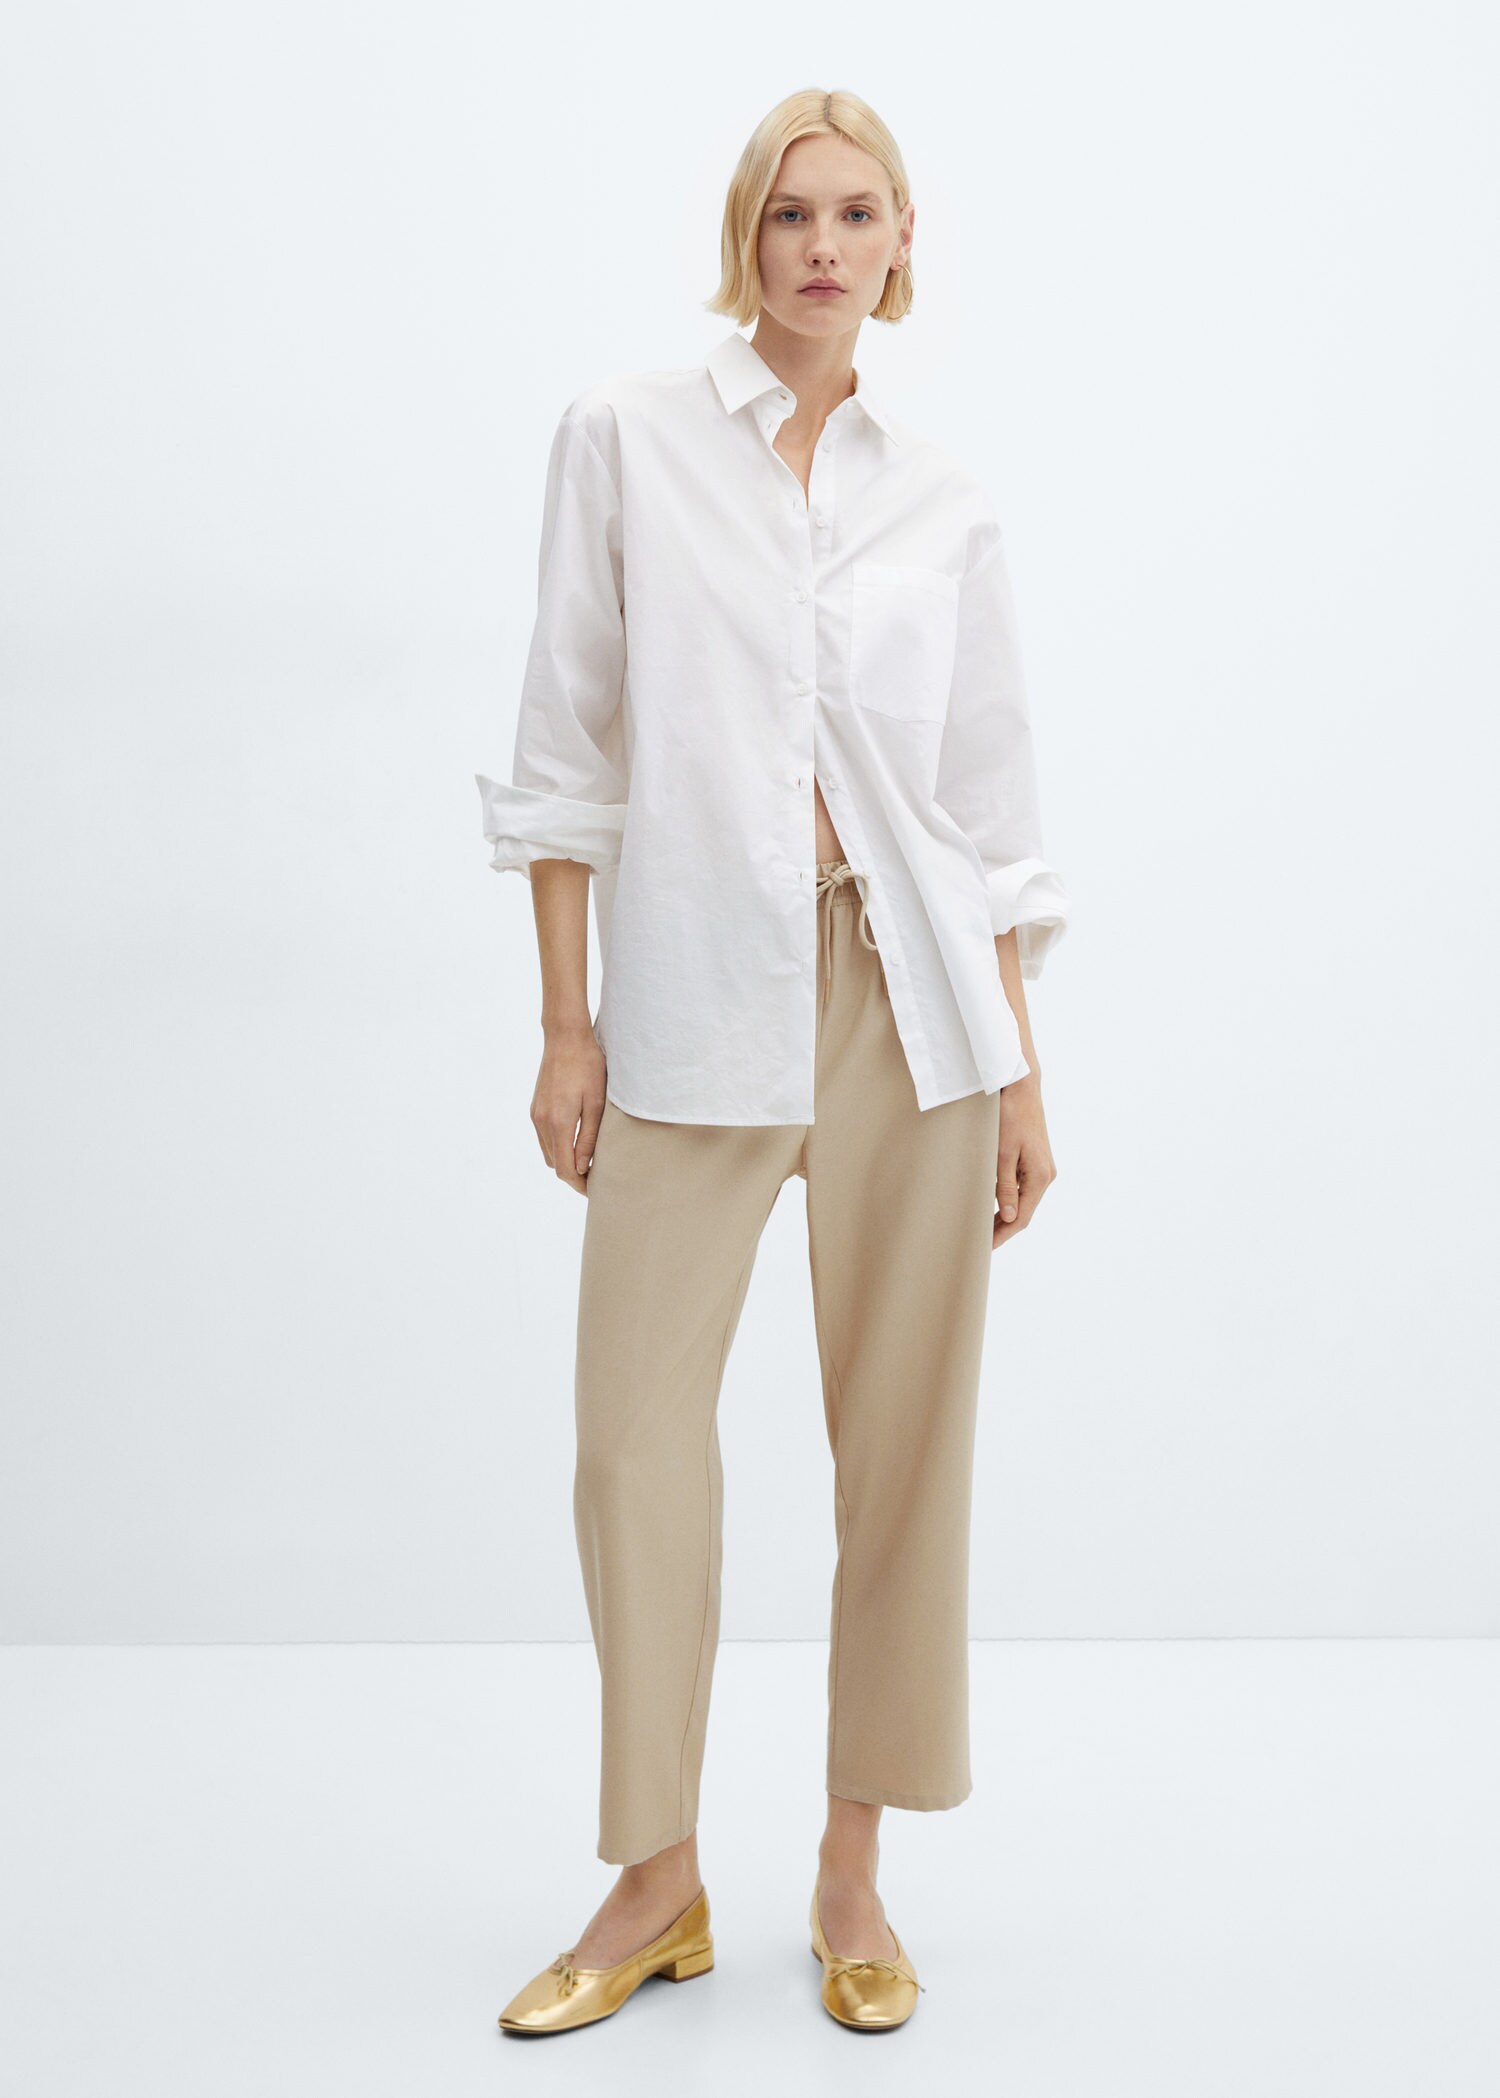 a woman in a white shirt and brown pants with a suspender Stock Photo by  Icons8